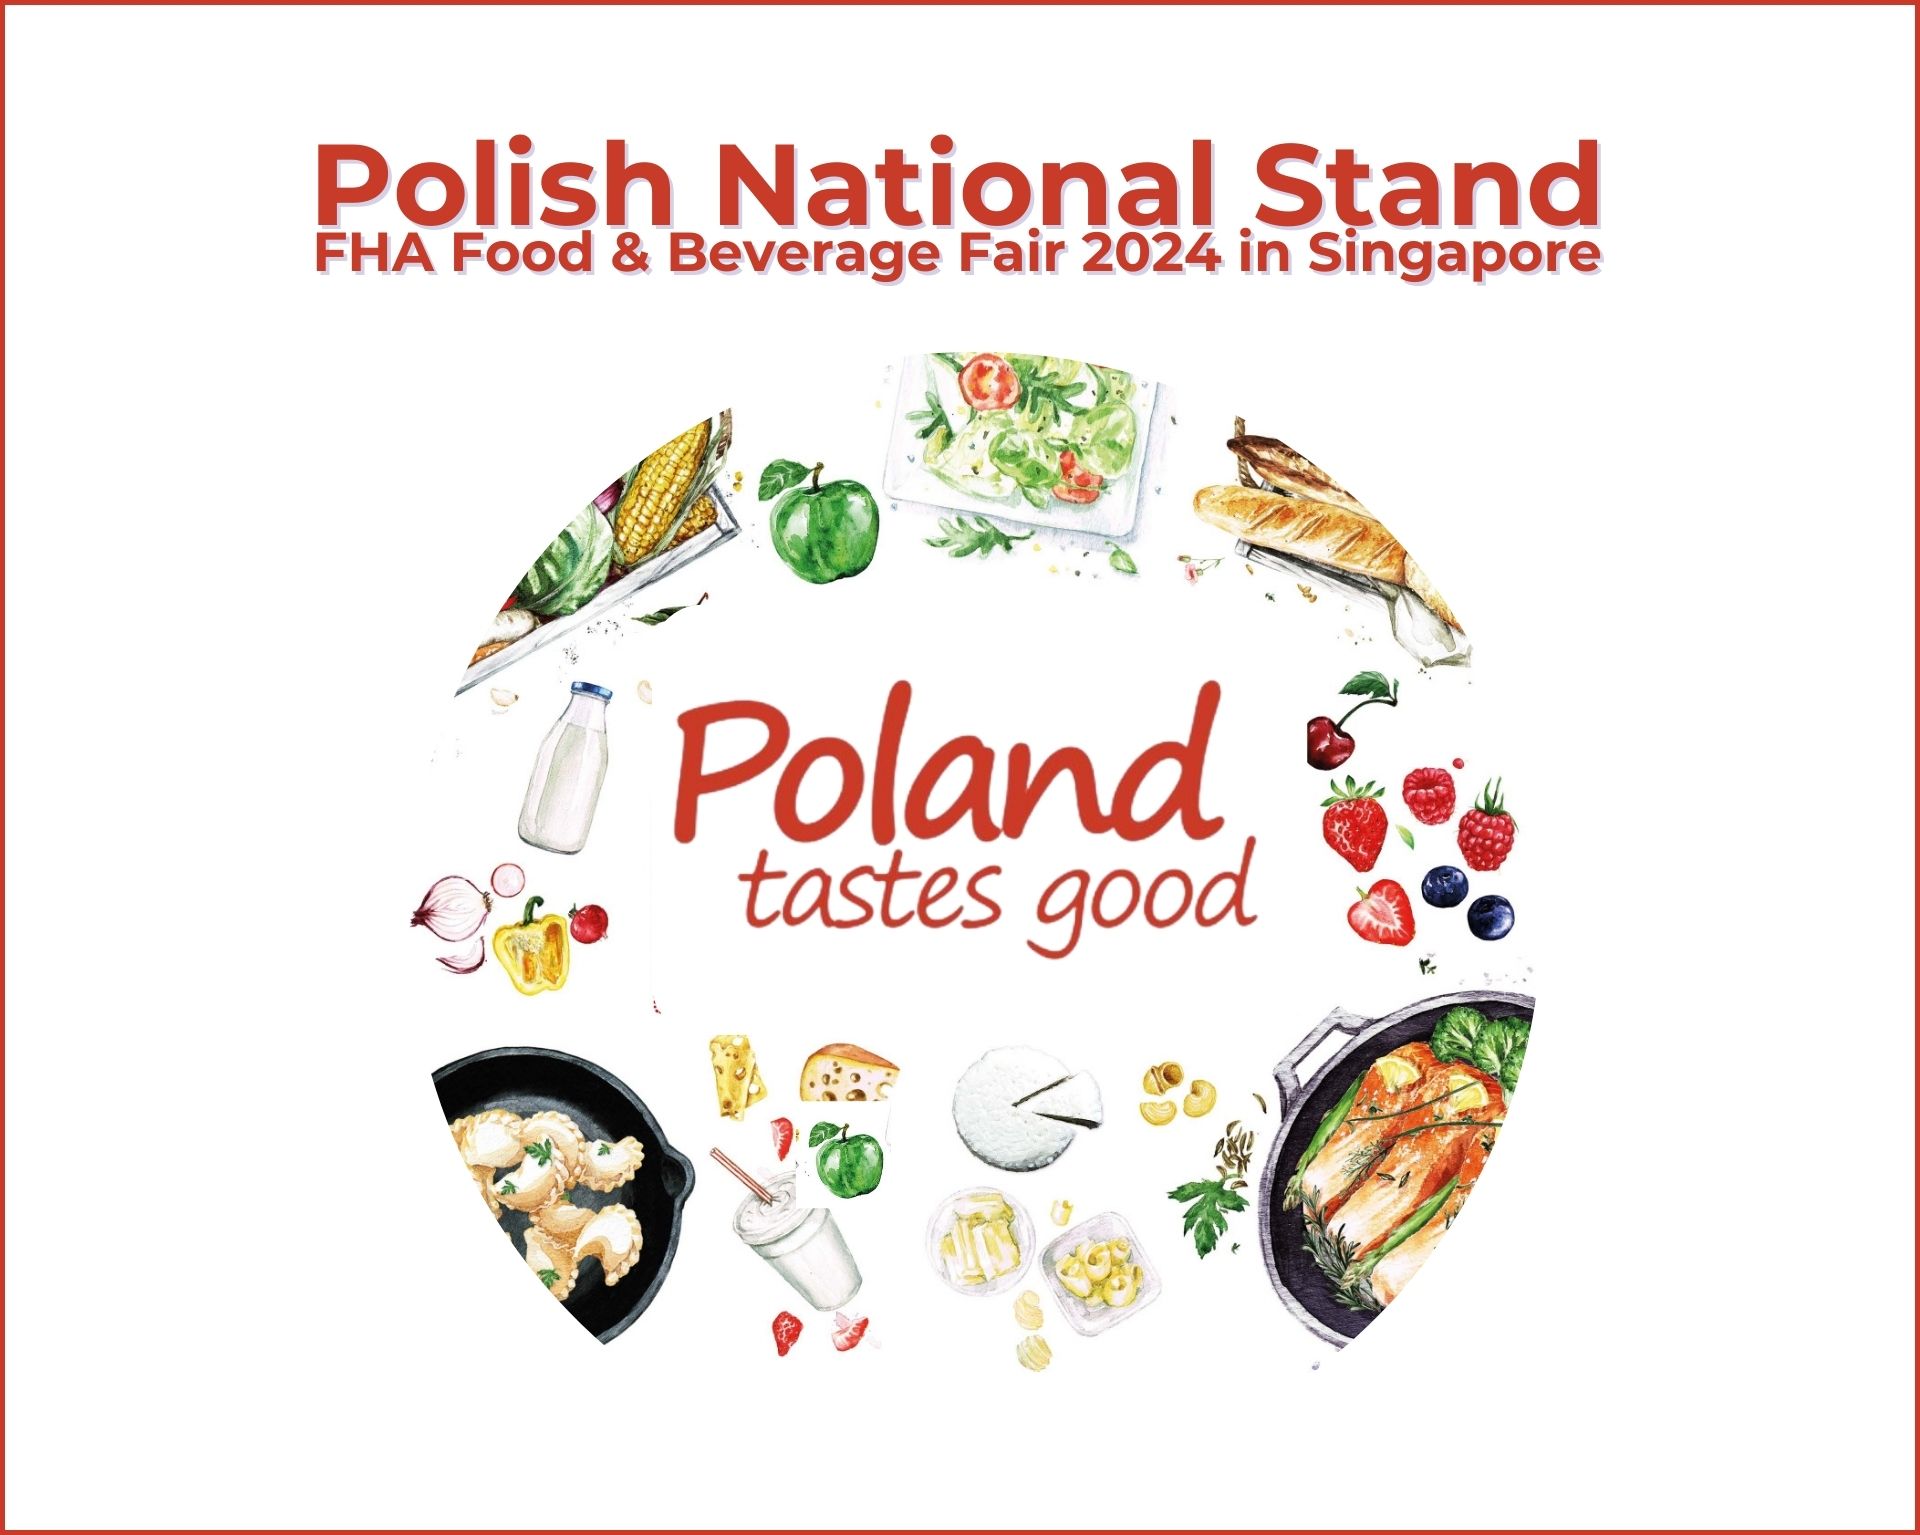 Poster for Polish National Stand at FHA2024 cover pho | polandshiok.sg